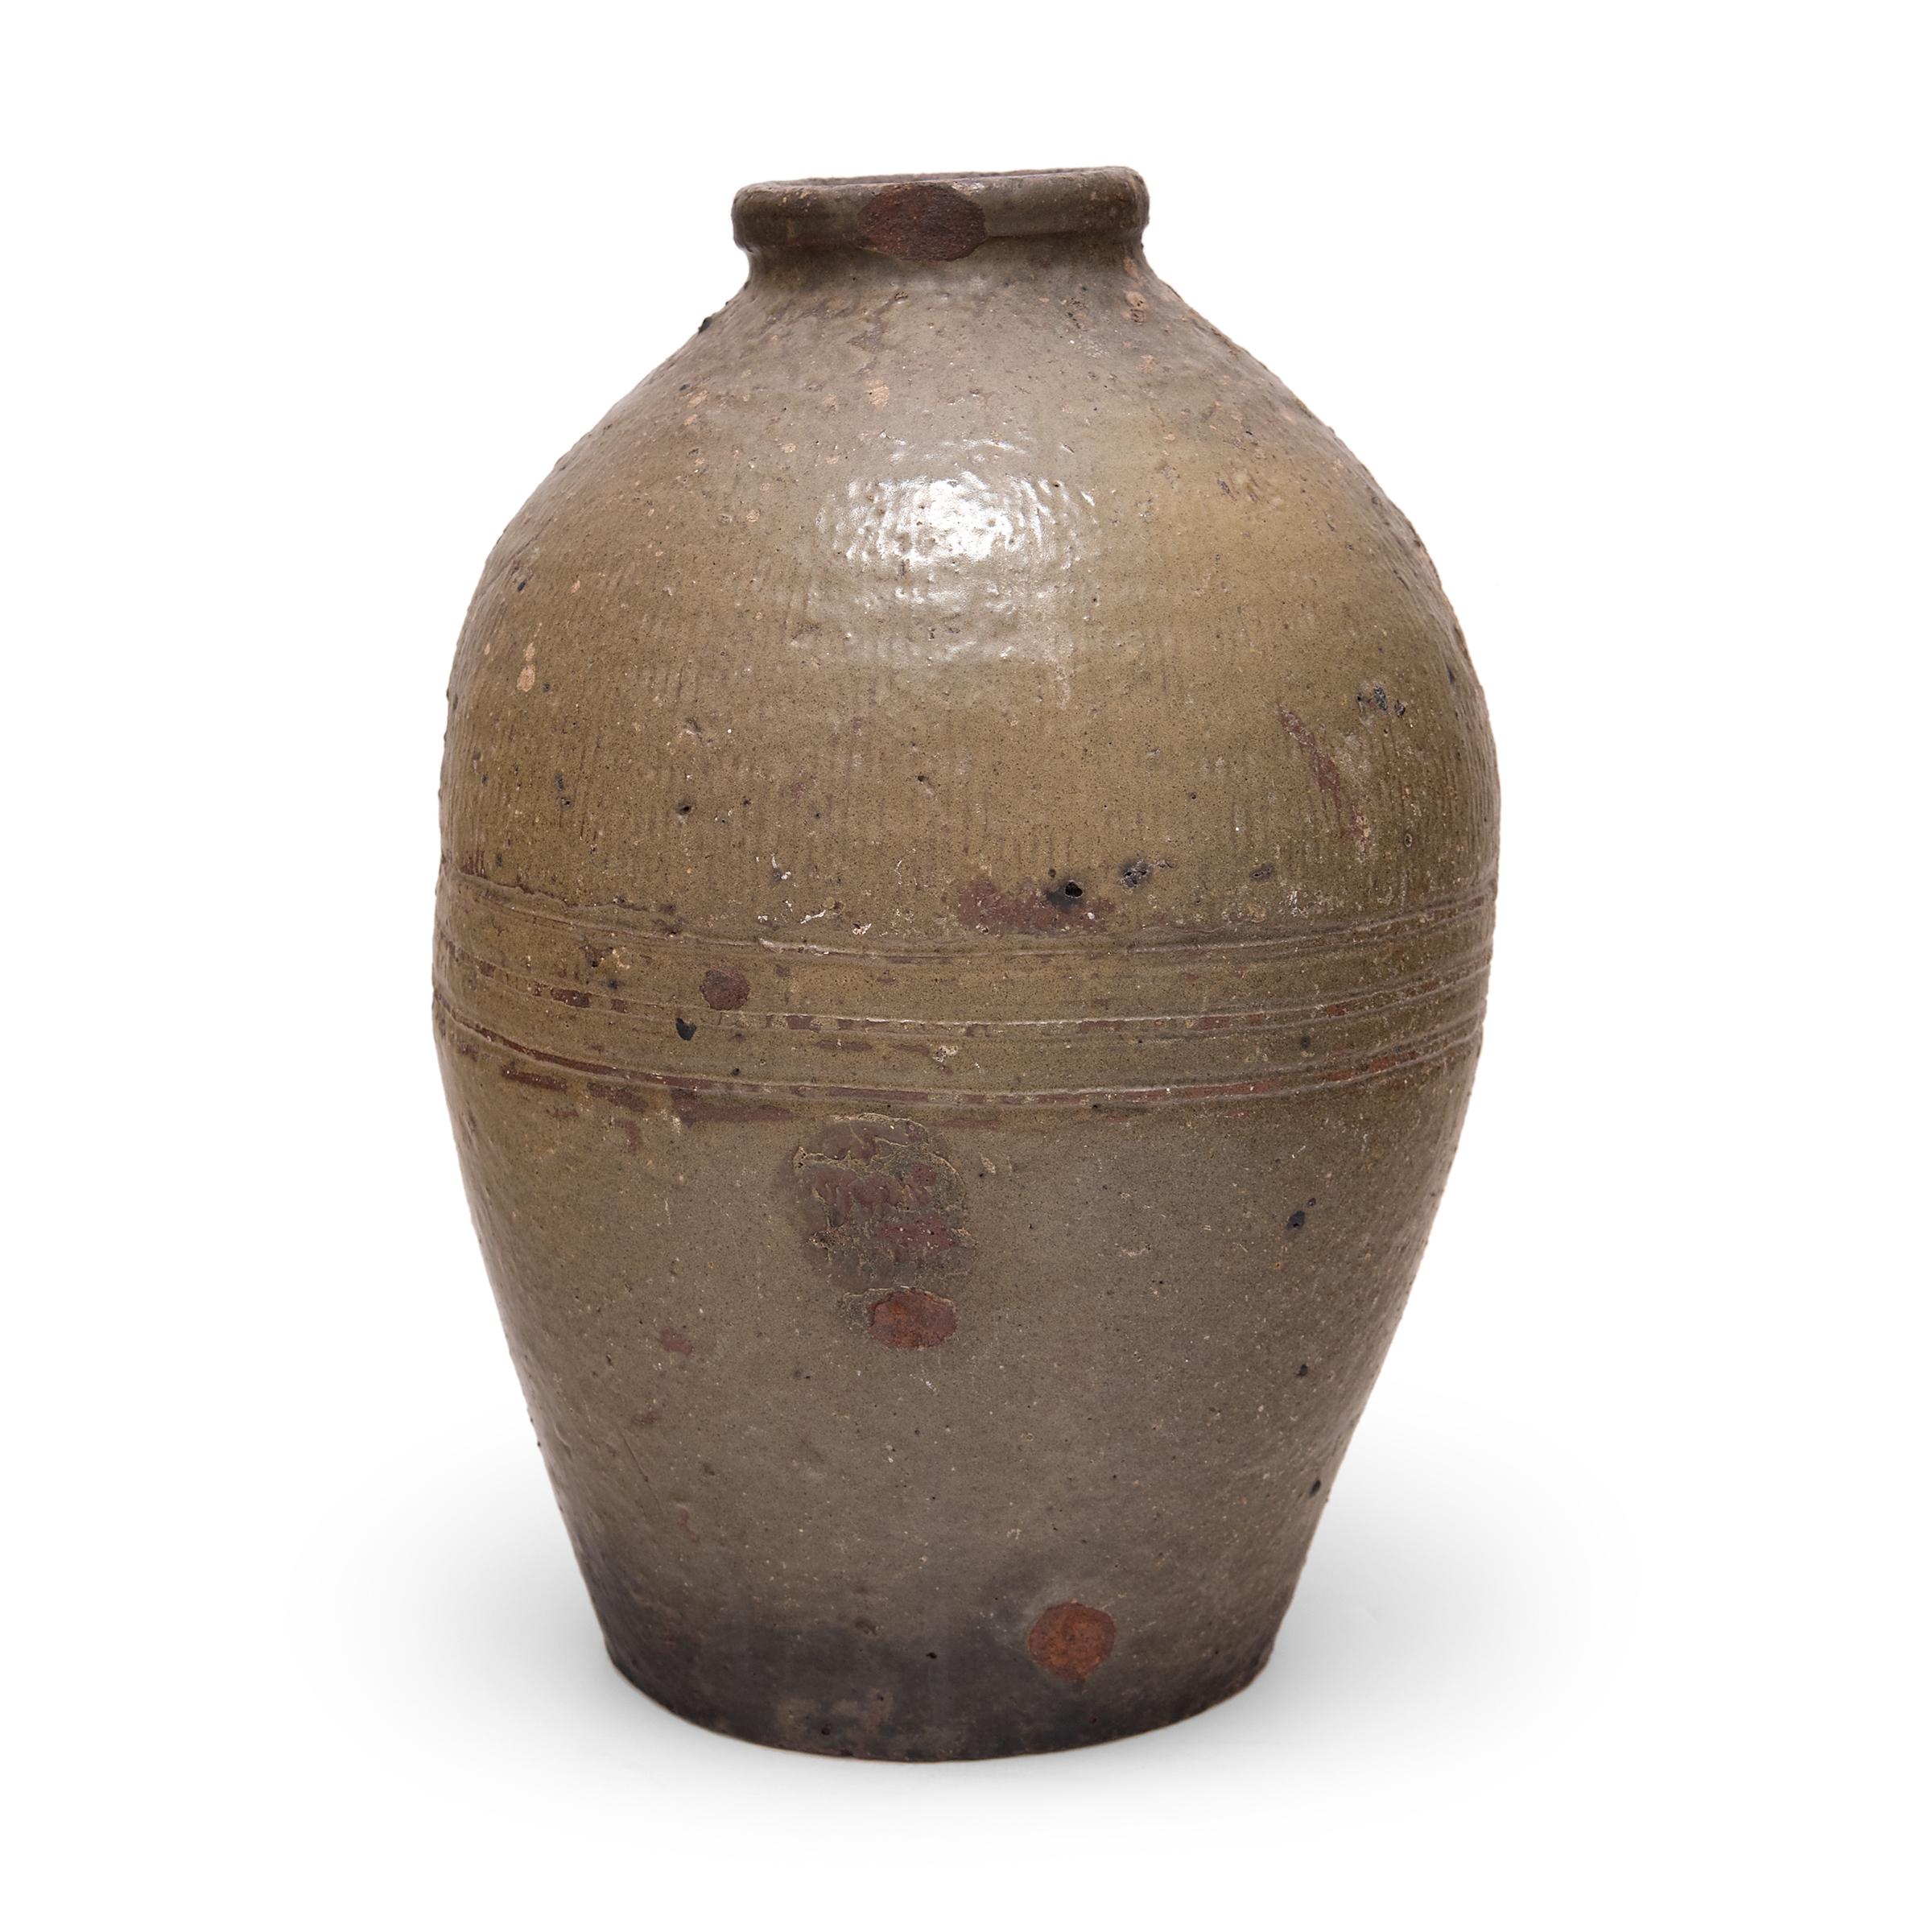 Originally used as a fermenting jar, this early 20th century ceramic pot is coated inside and out with a subdued green-brown glaze. The jar has a narrow mouth and a rounded, oblong form that tapers to the base. Shaped by paddling, the jar has a